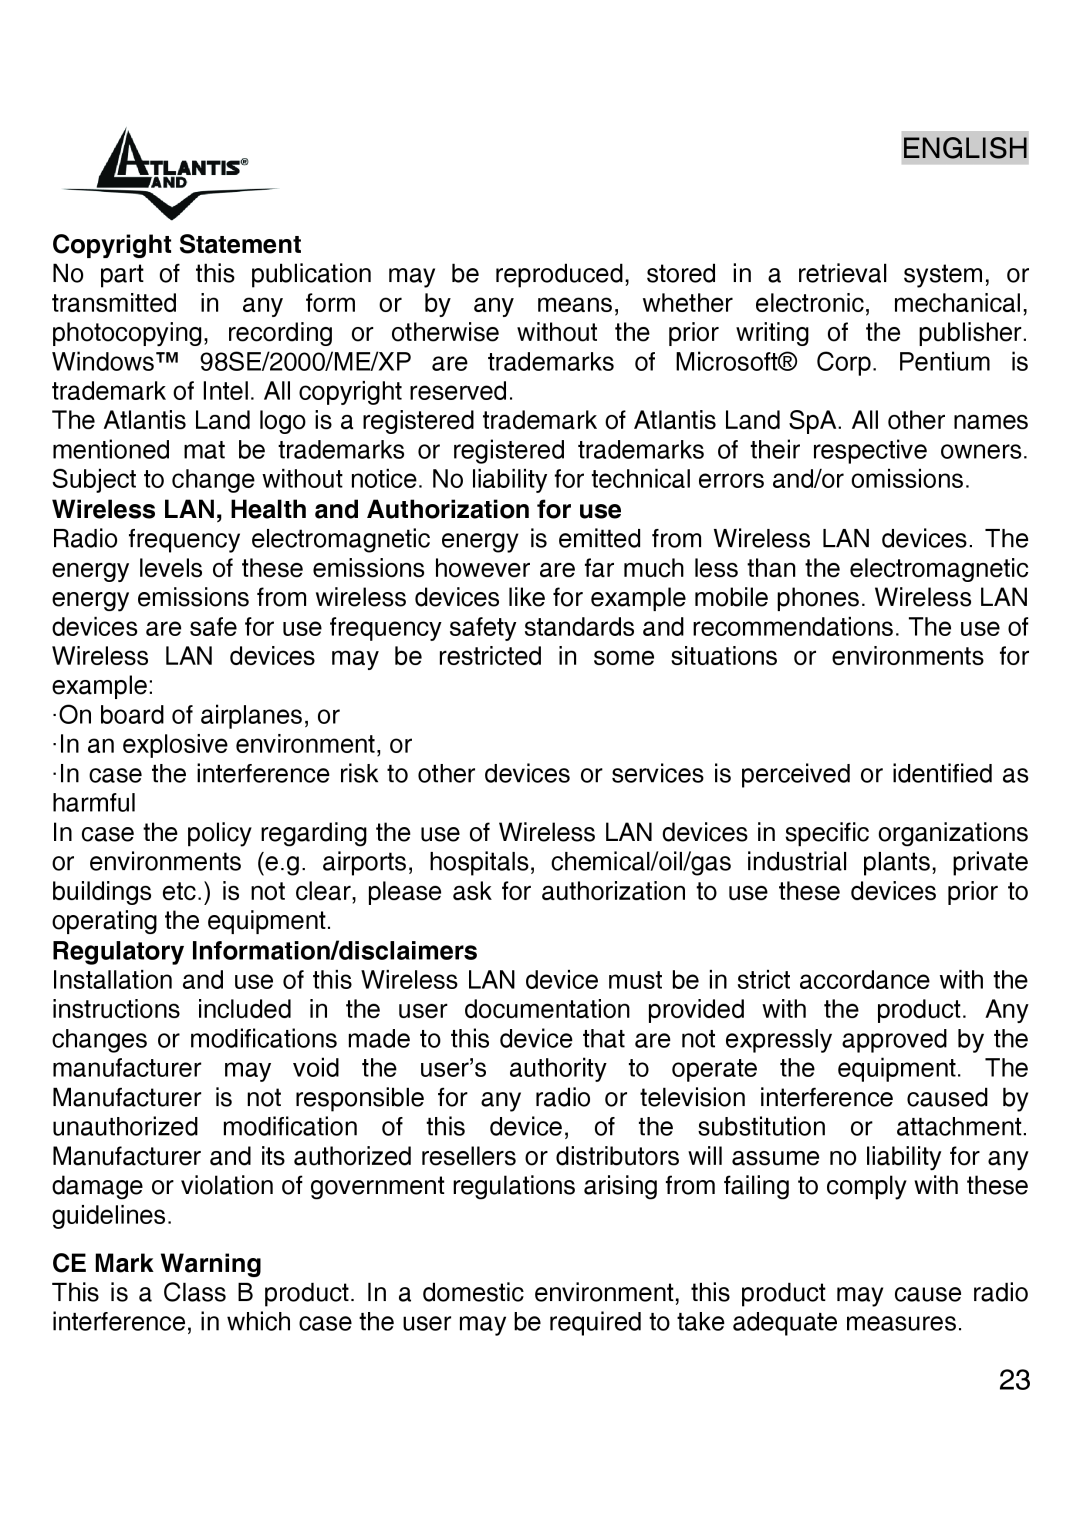 Atlantis Land A02-UP-W54 English, Copyright Statement, Wireless LAN, Health and Authorization for use, CE Mark Warning 